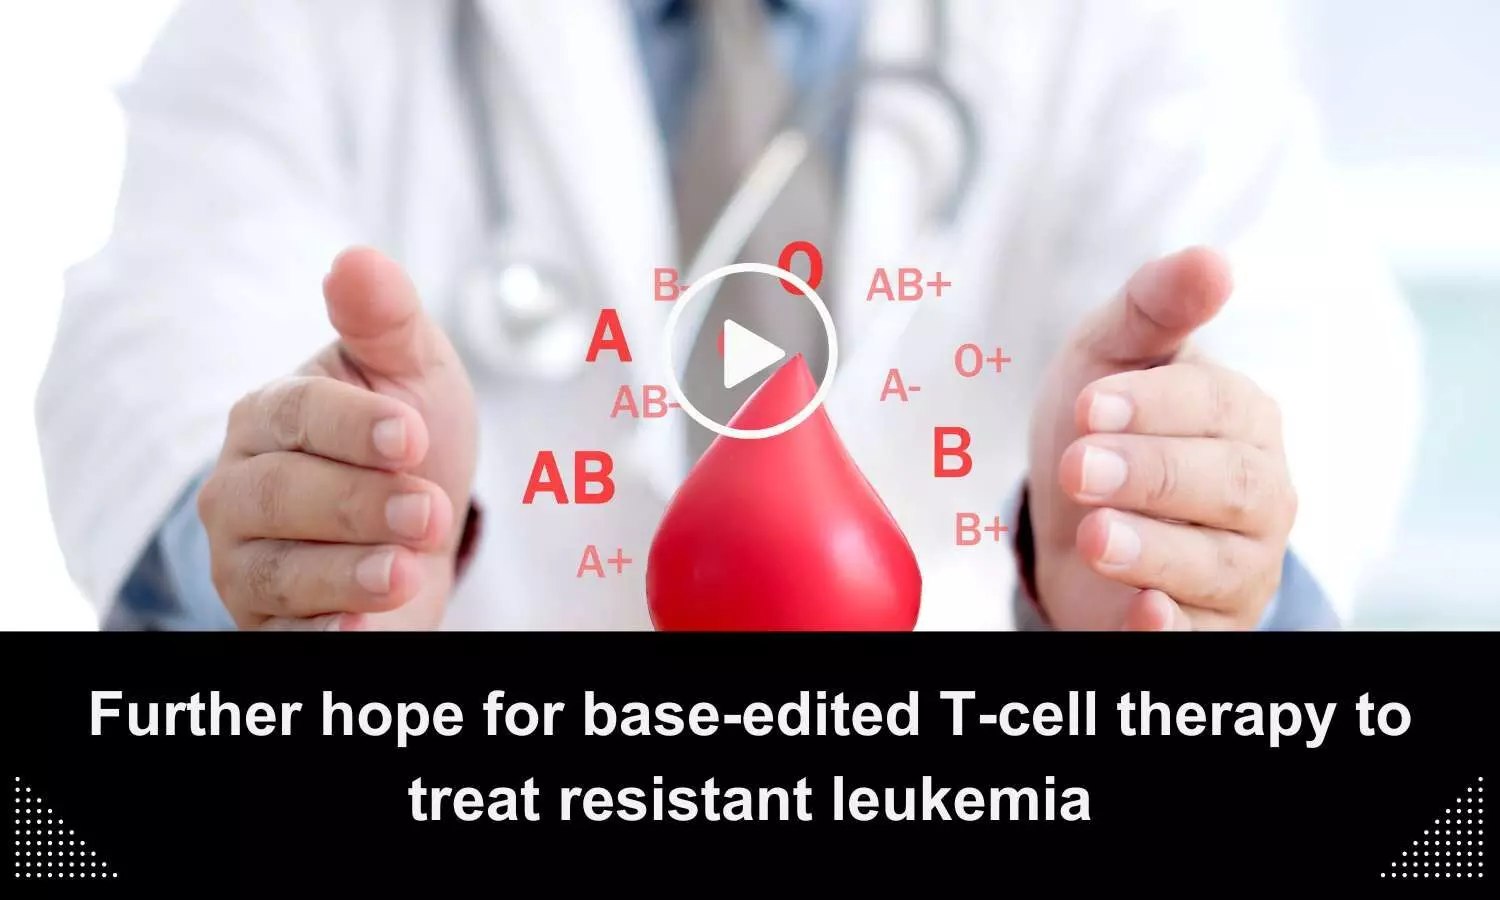 Further hope for base-edited T-cell therapy to treat resistant leukaemia